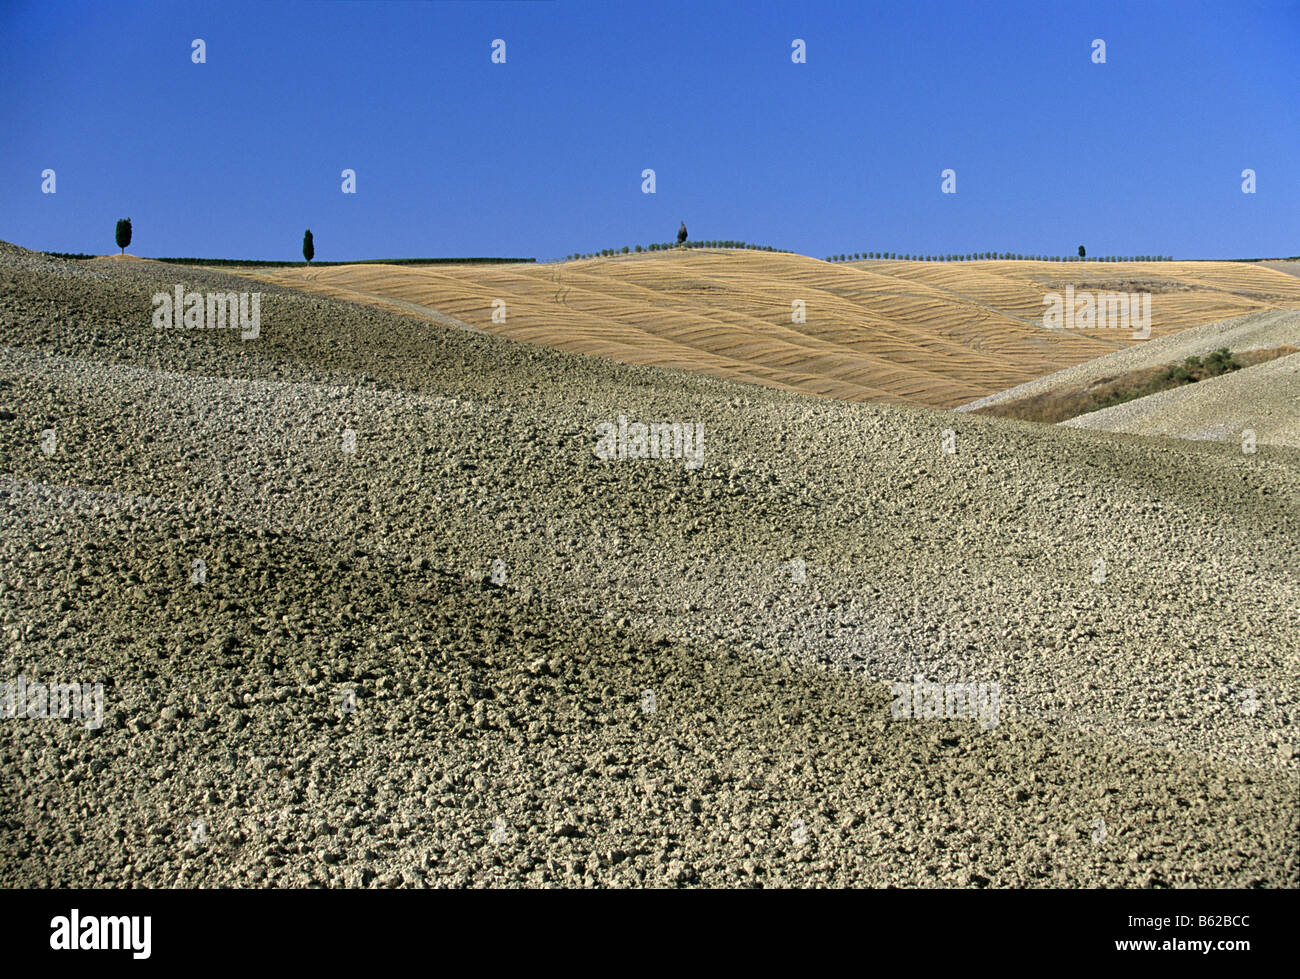 Harvested wheat fields, ploughed field, landscape near Montalcino, Province of Siena, Toscany, Italy, Europe Stock Photo